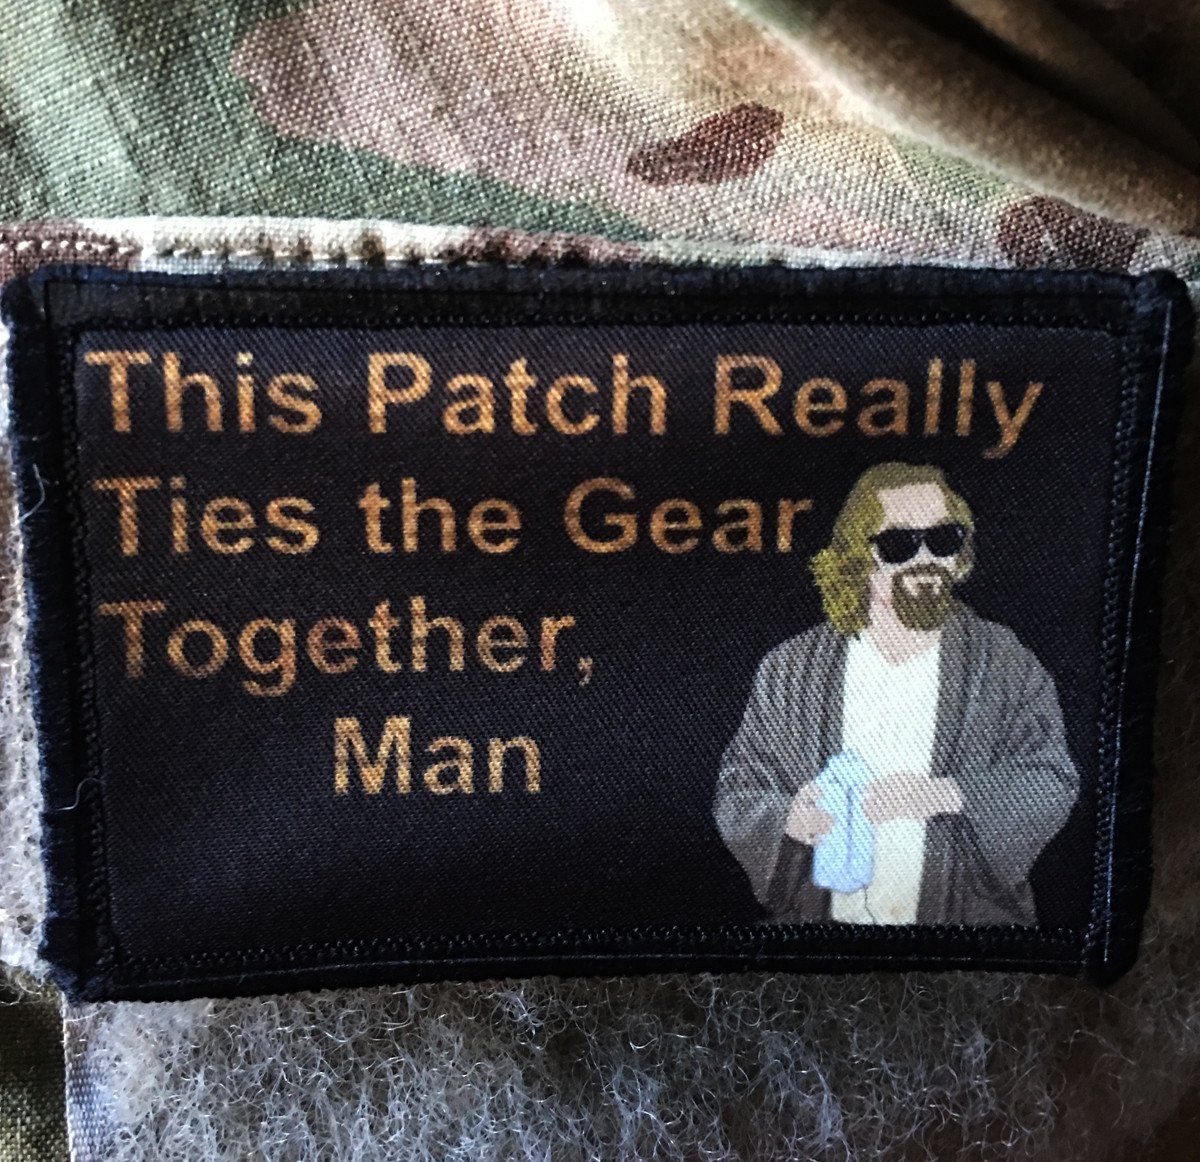 Shop Morale Patch at Redheaded T Shirts  Custom Velcro Morale Patches and  Accessories